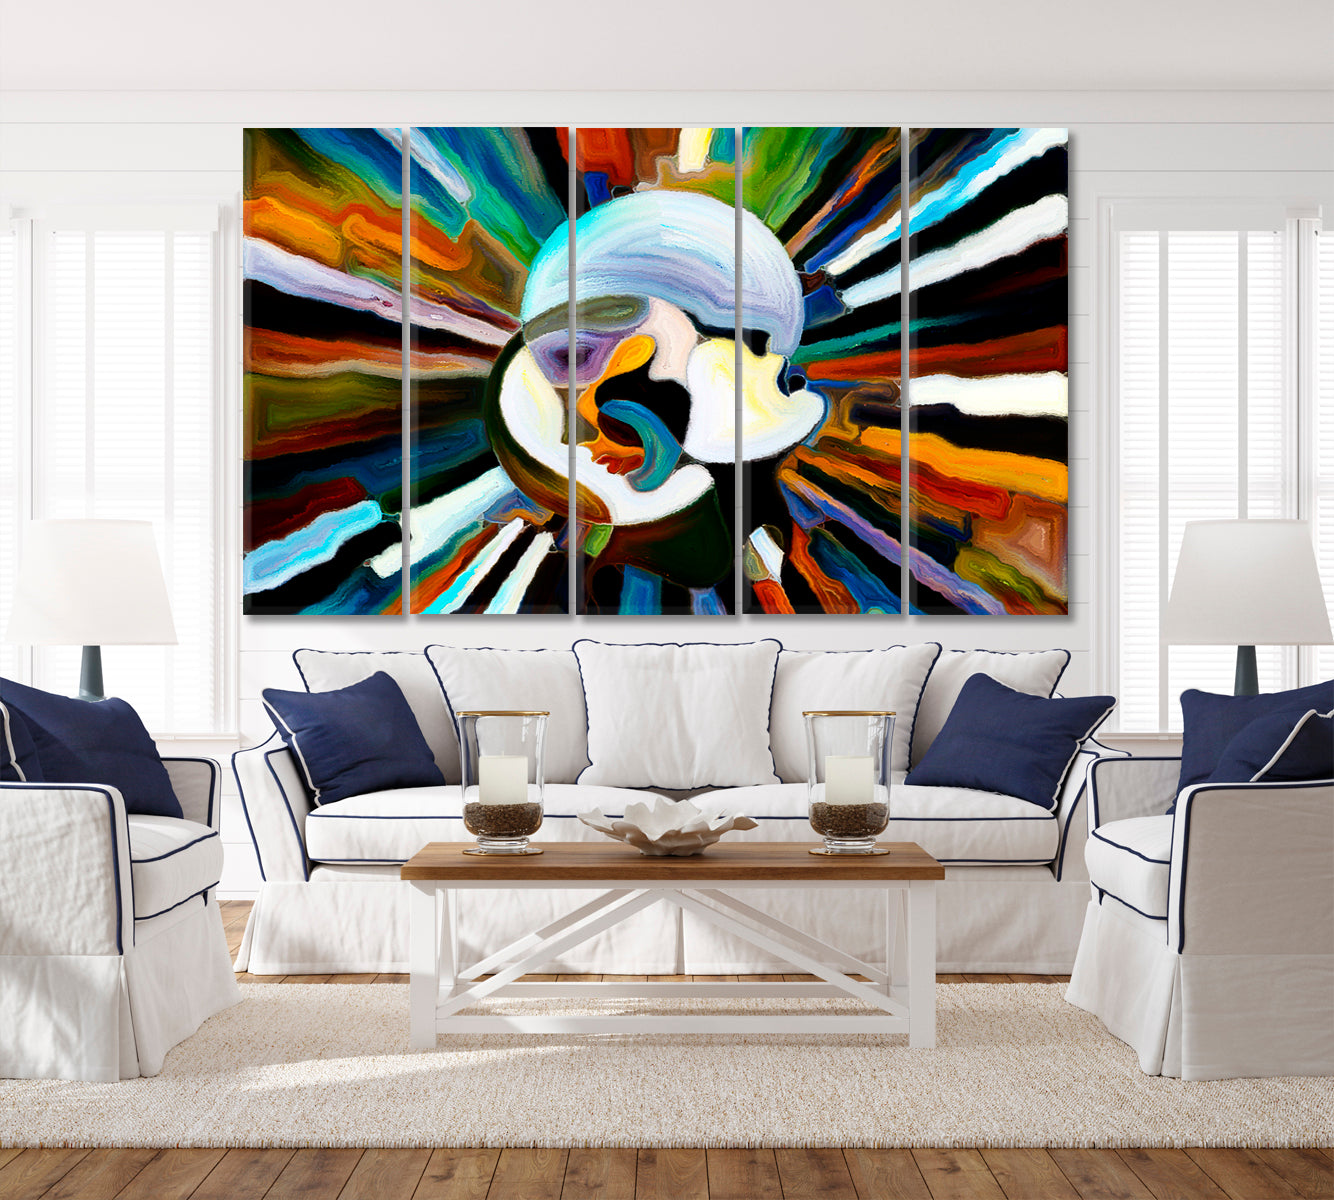 Think Different, Human Profiles Abstract Patterns And Colors Abstract Art Print Artesty 5 panels 36" x 24" 